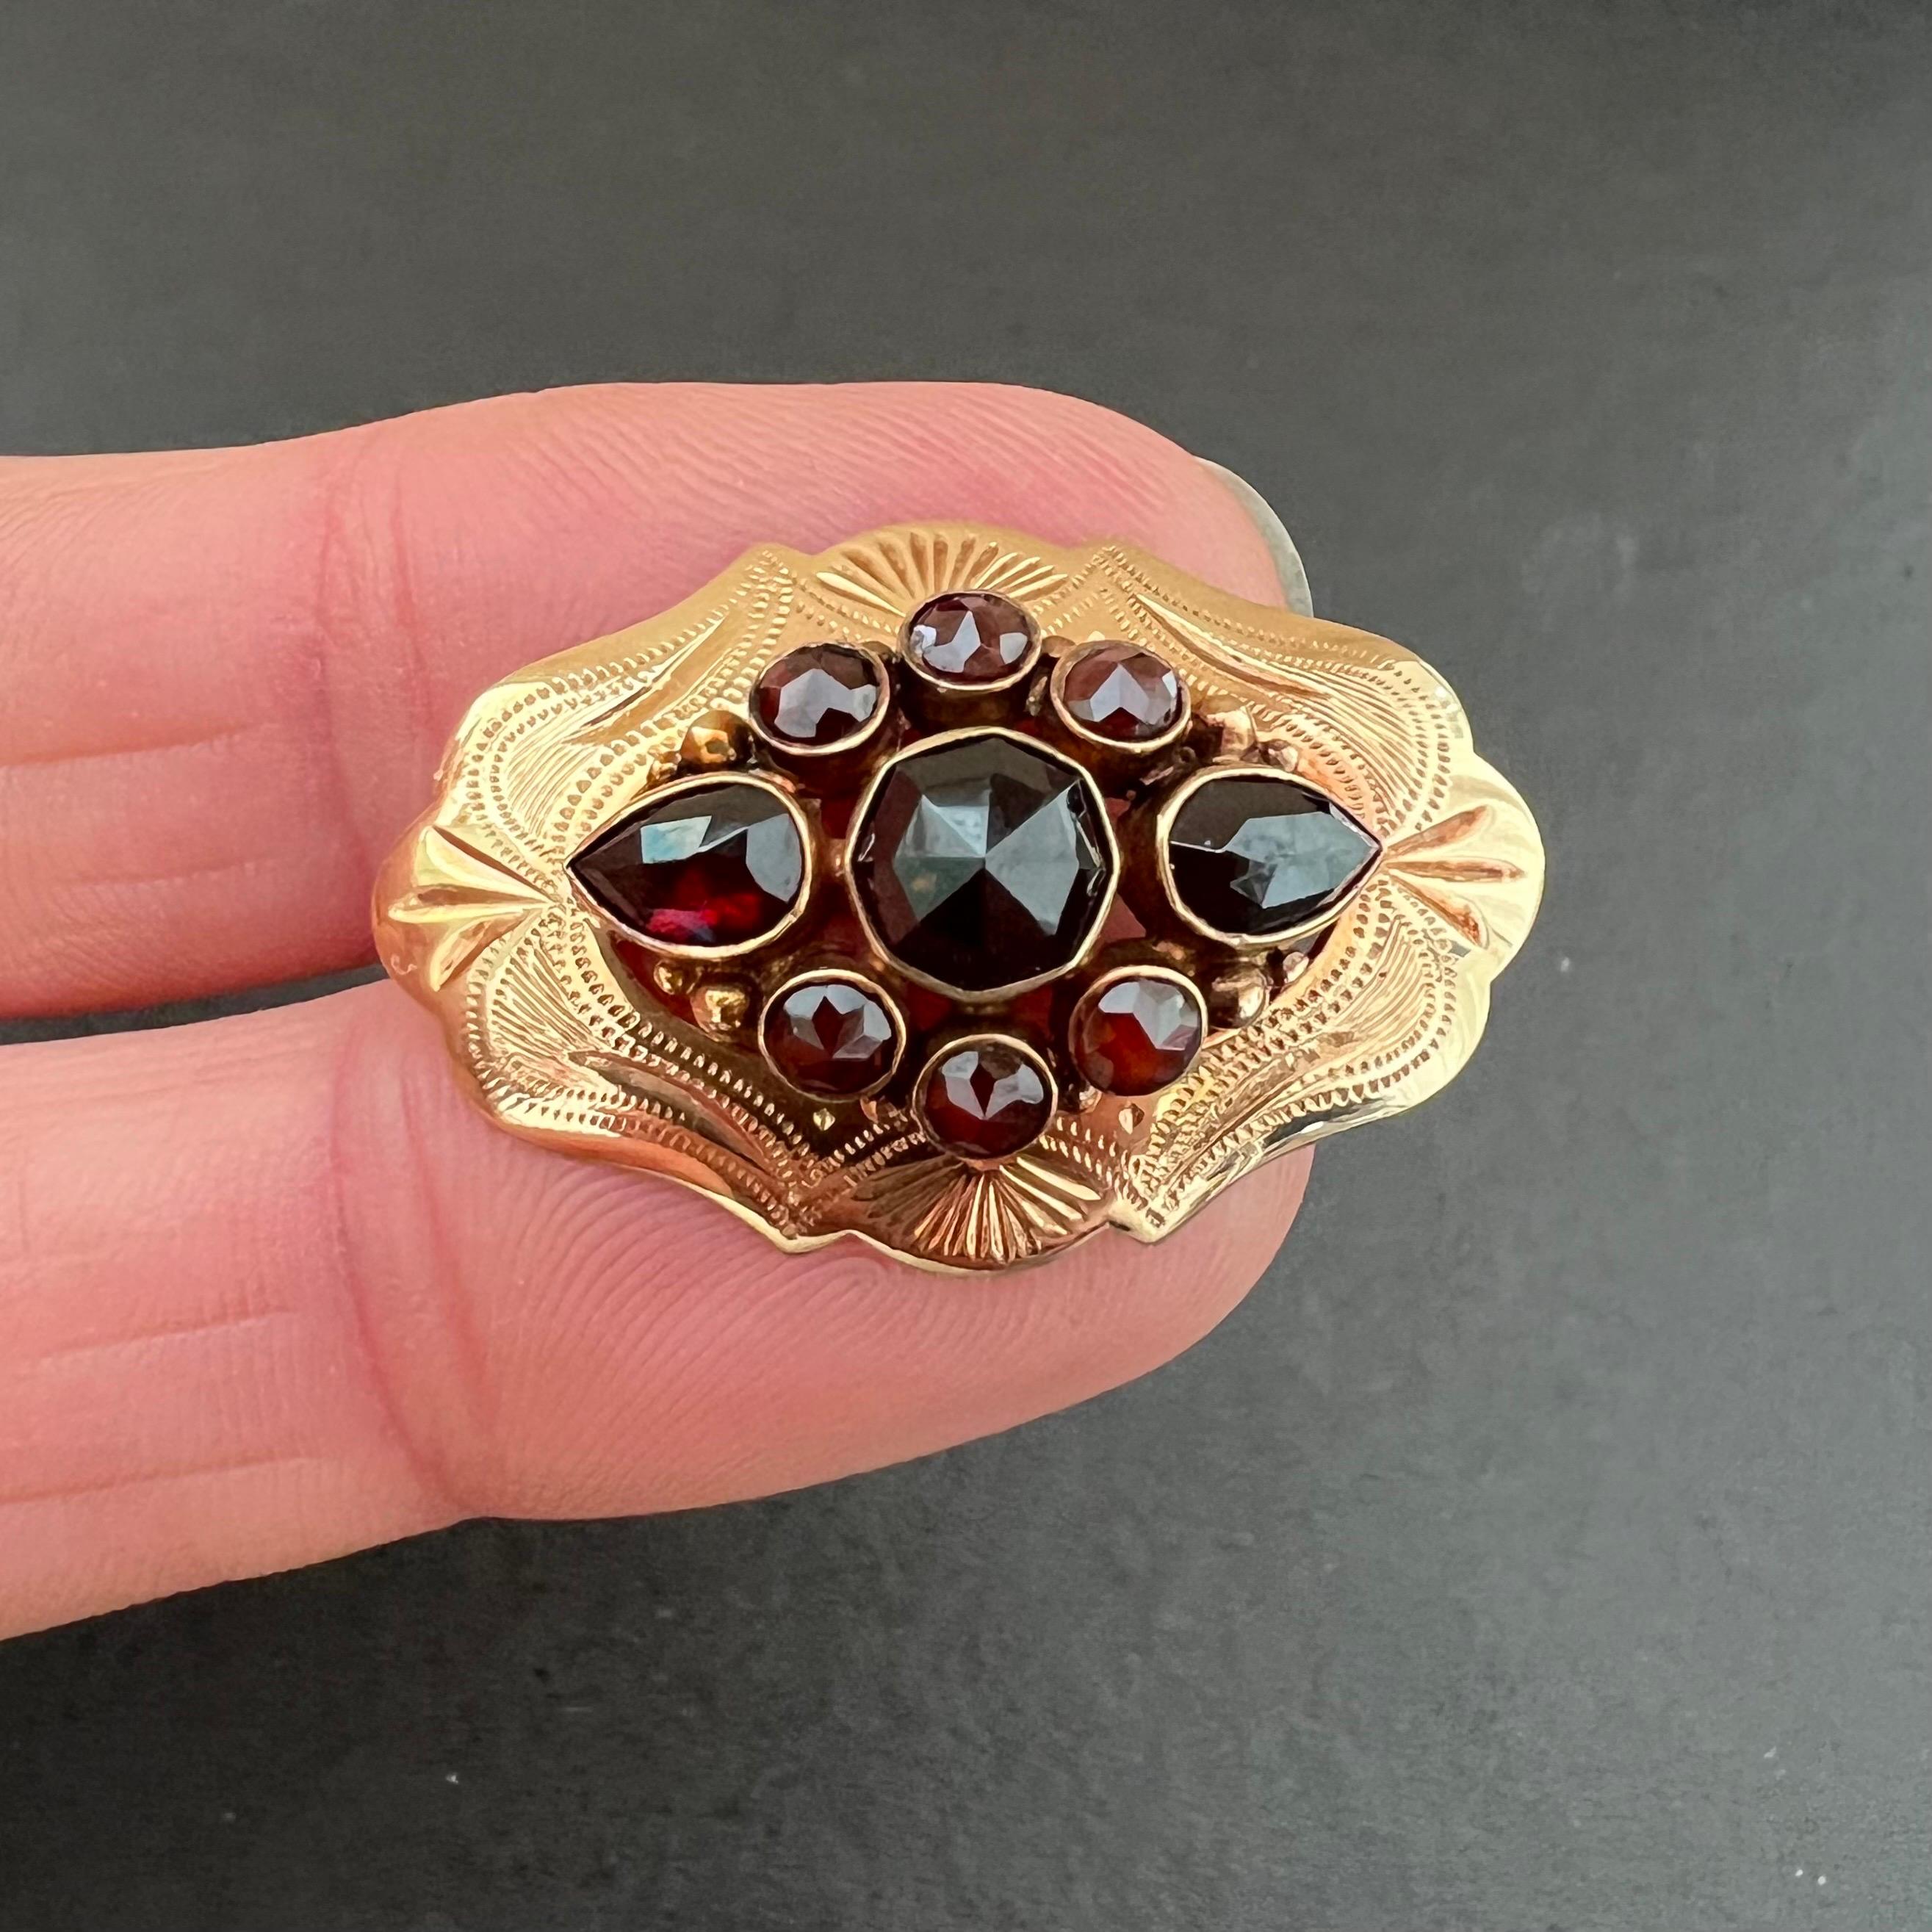 A 14 karat yellow gold oval brooch with an engraved scalloped edge. The brooch is set with a fantasy garnet entourage in the center with seven round and two drop-shaped faceted garnets. The garnets are rose cut and bezel set in the gold mounting.